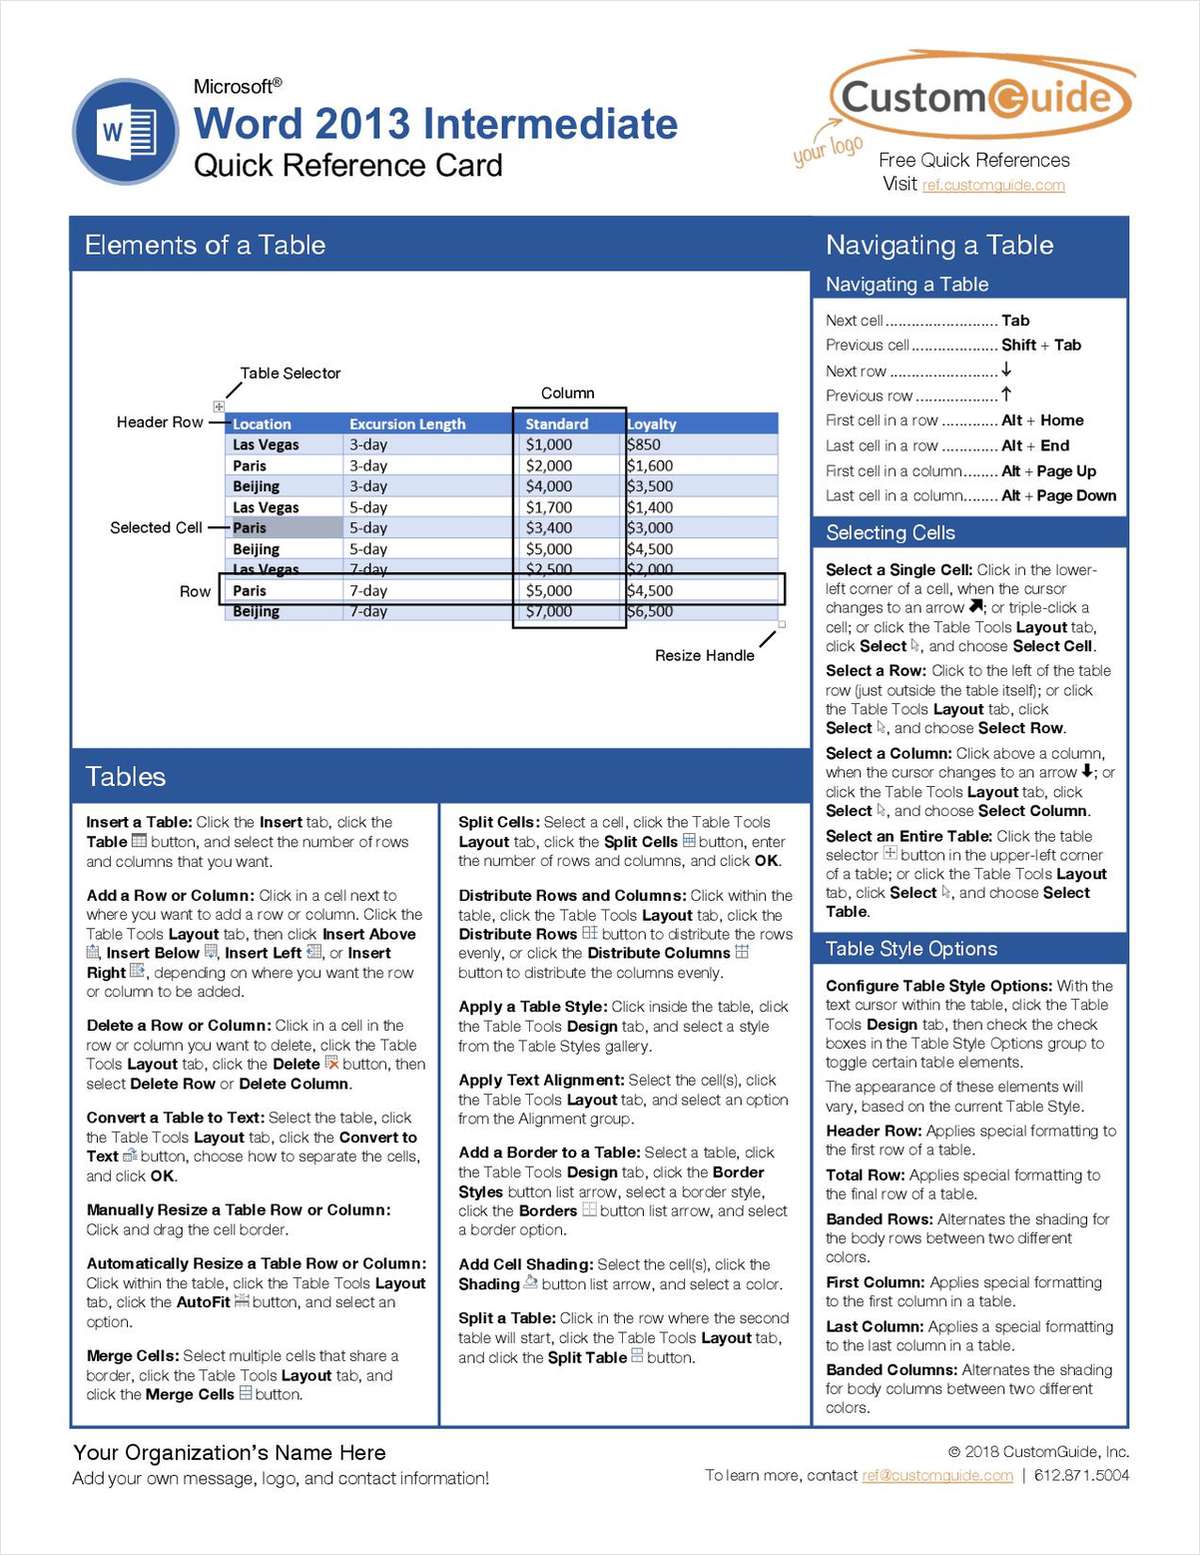 Microsoft Word 2013 Intermediate - Quick Reference Card